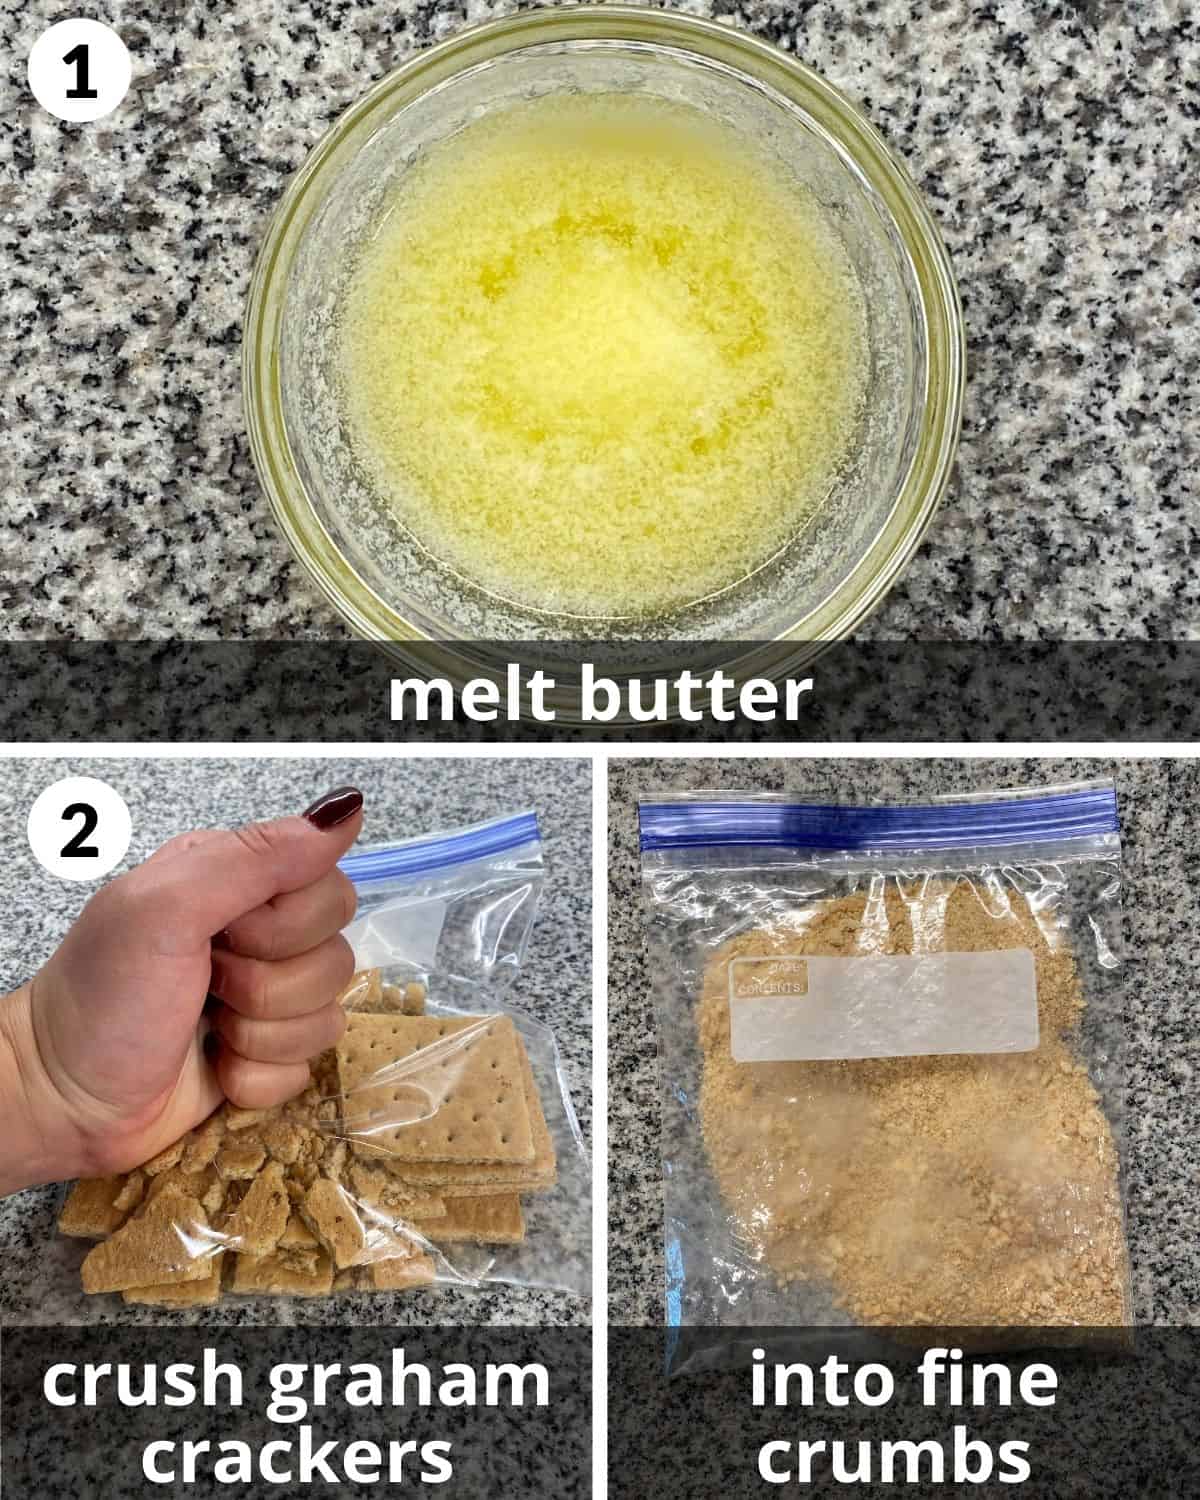 3 photos. Melted butter. Fist crushing graham crackers. Cracker crumbs in bag.